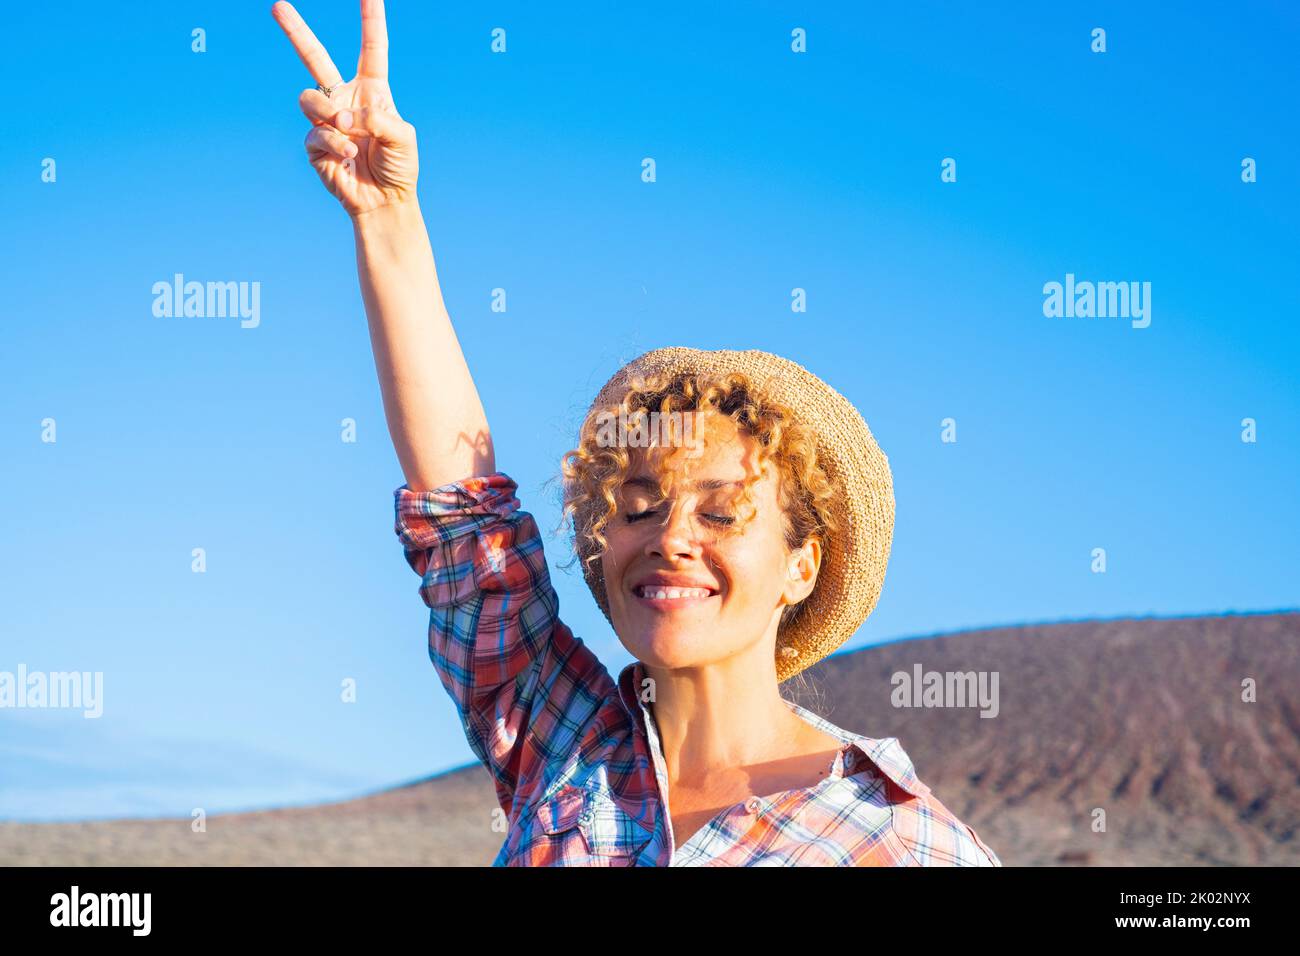 Victory hand gesture to stop war and love peace for people concept image with happy adult woman in the country side, smiling and enjoying the day. Environment and good future for earth supporter Stock Photo